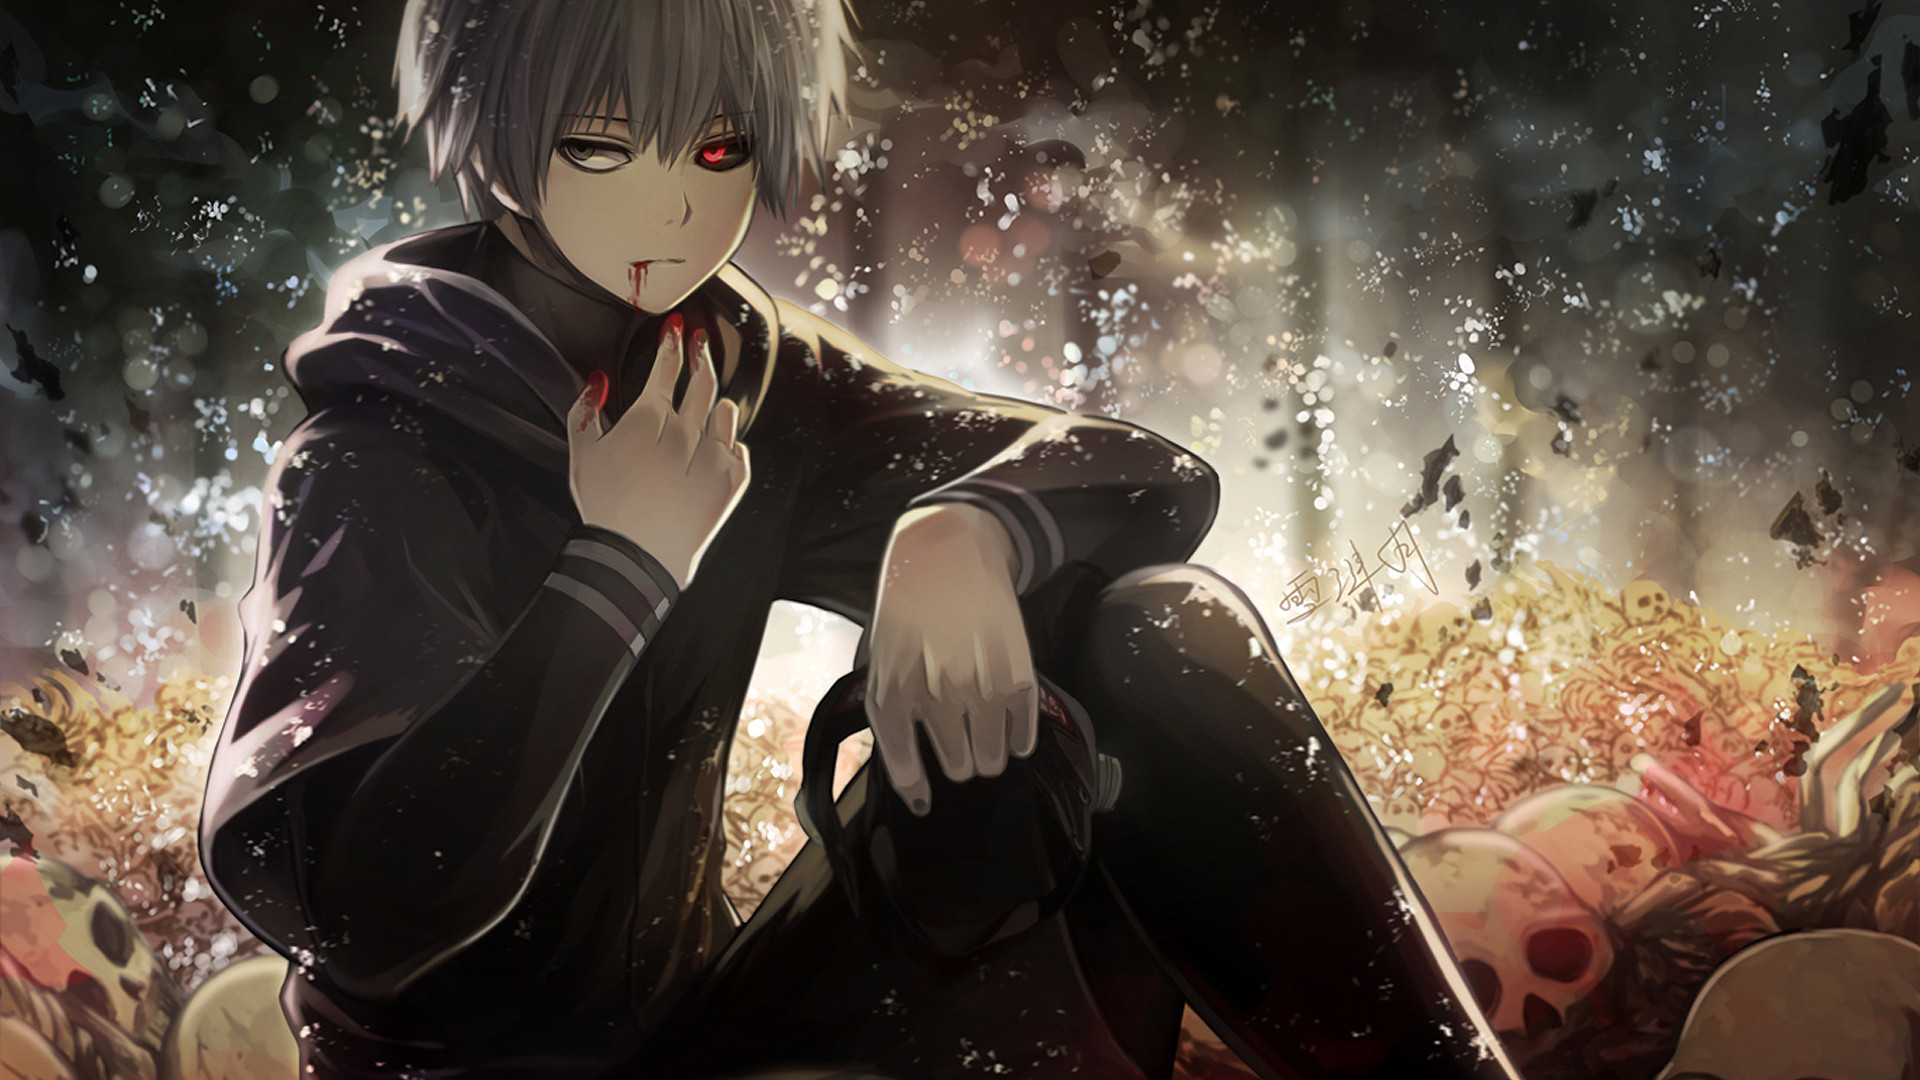 1920x1080 Tokyo Ghoul HD Wallpapers and Backgrounds 1920Ã1080 Ghoul Wallpapers (32  Wallpapers) |